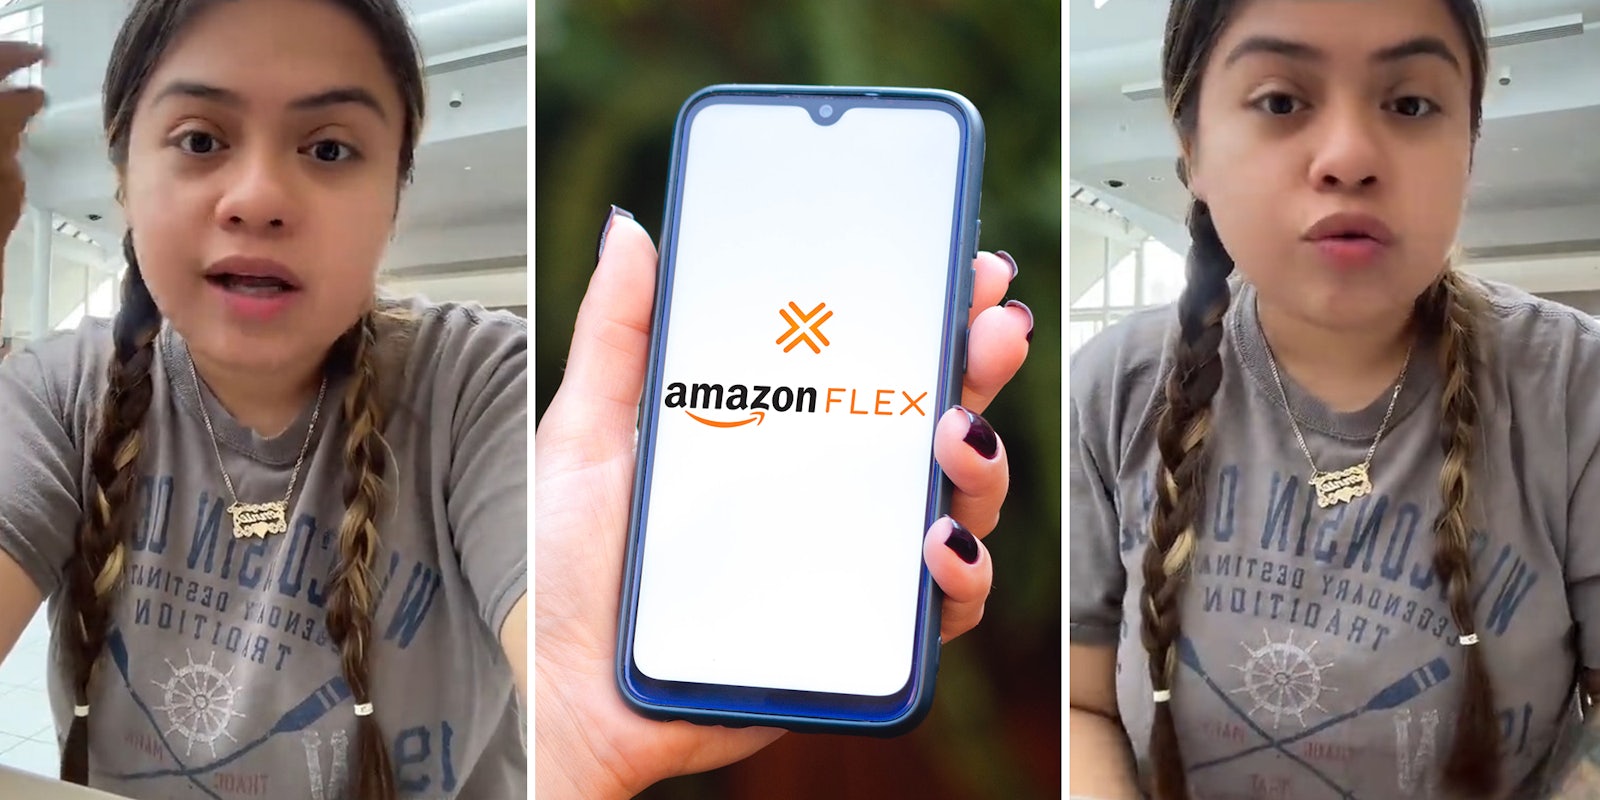 Amazon driver reveals why she would never do Amazon Flex